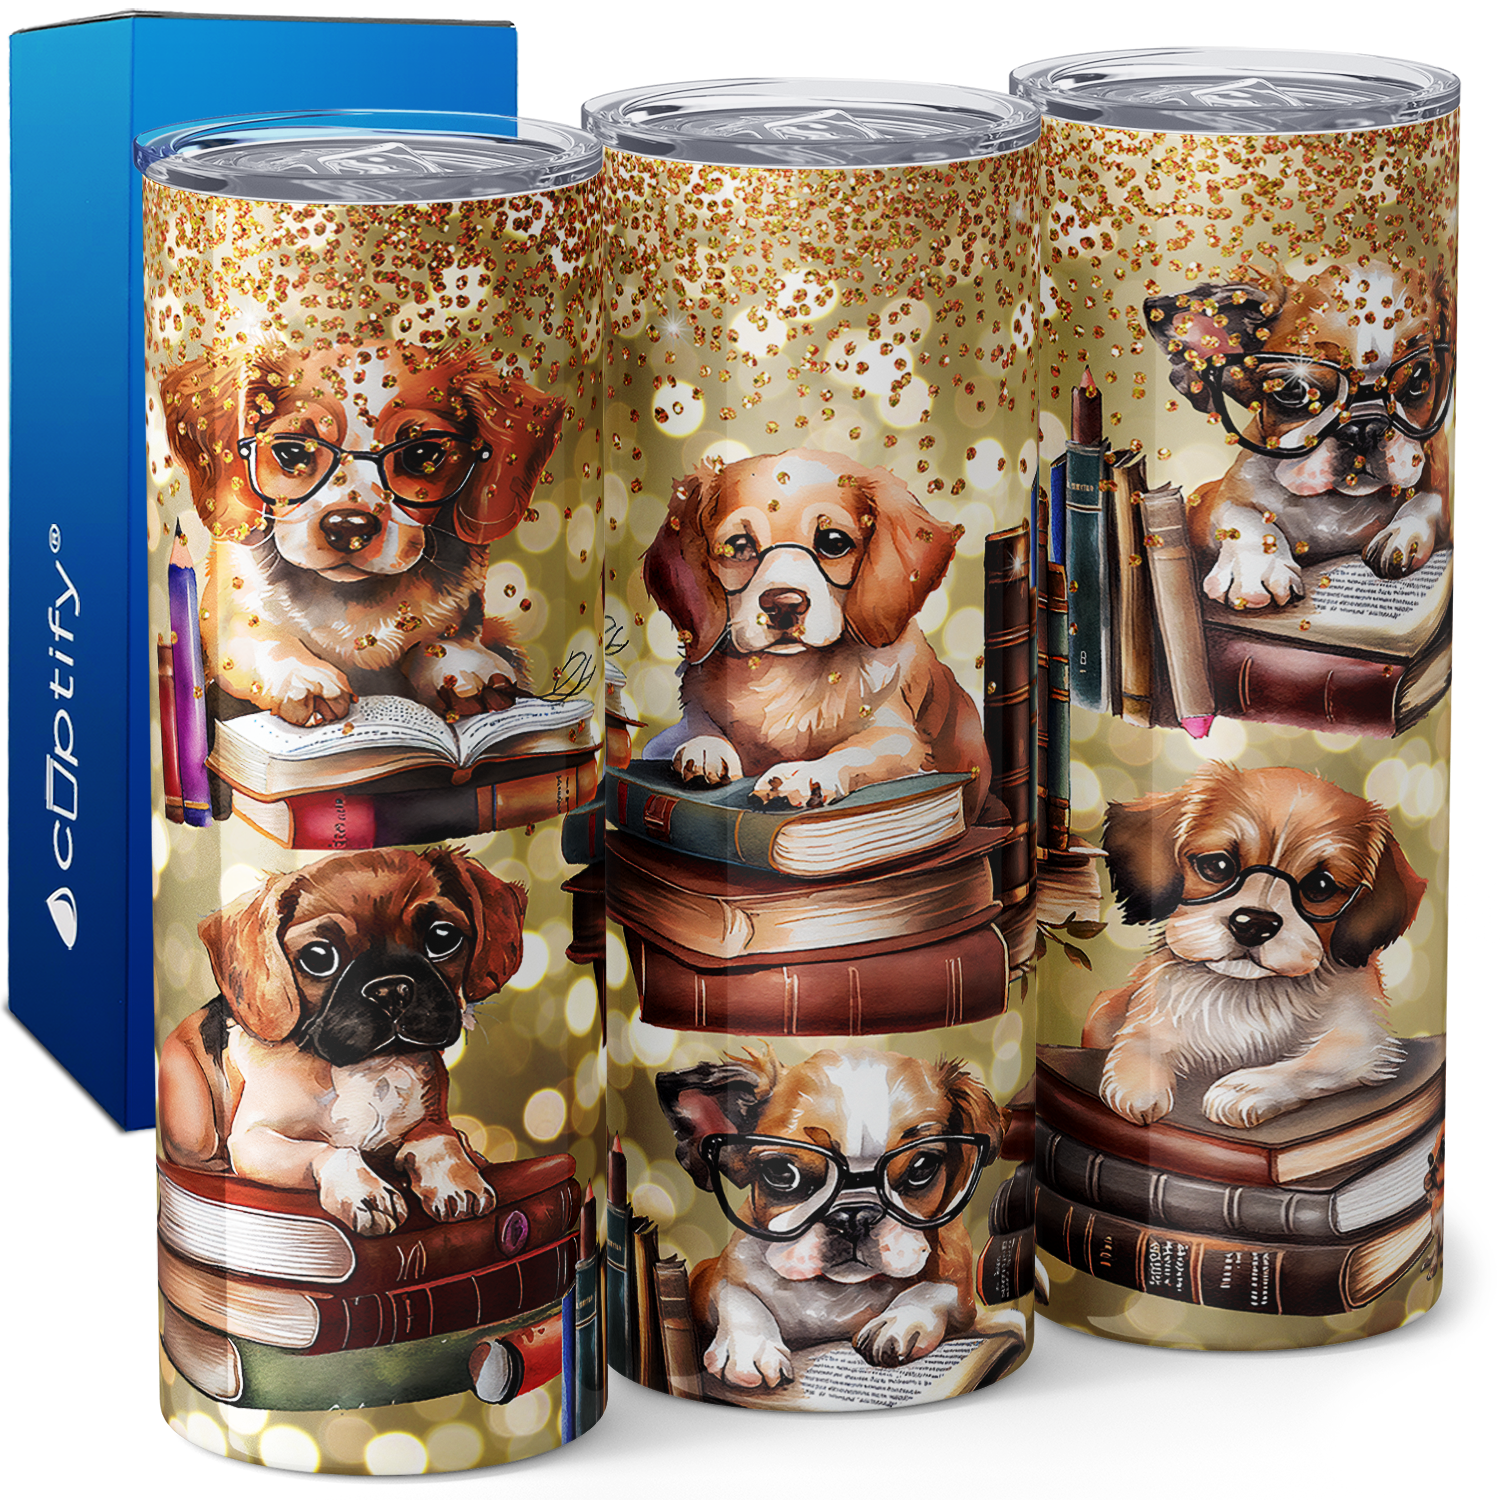 Books and Puppies 20oz Skinny Tumbler